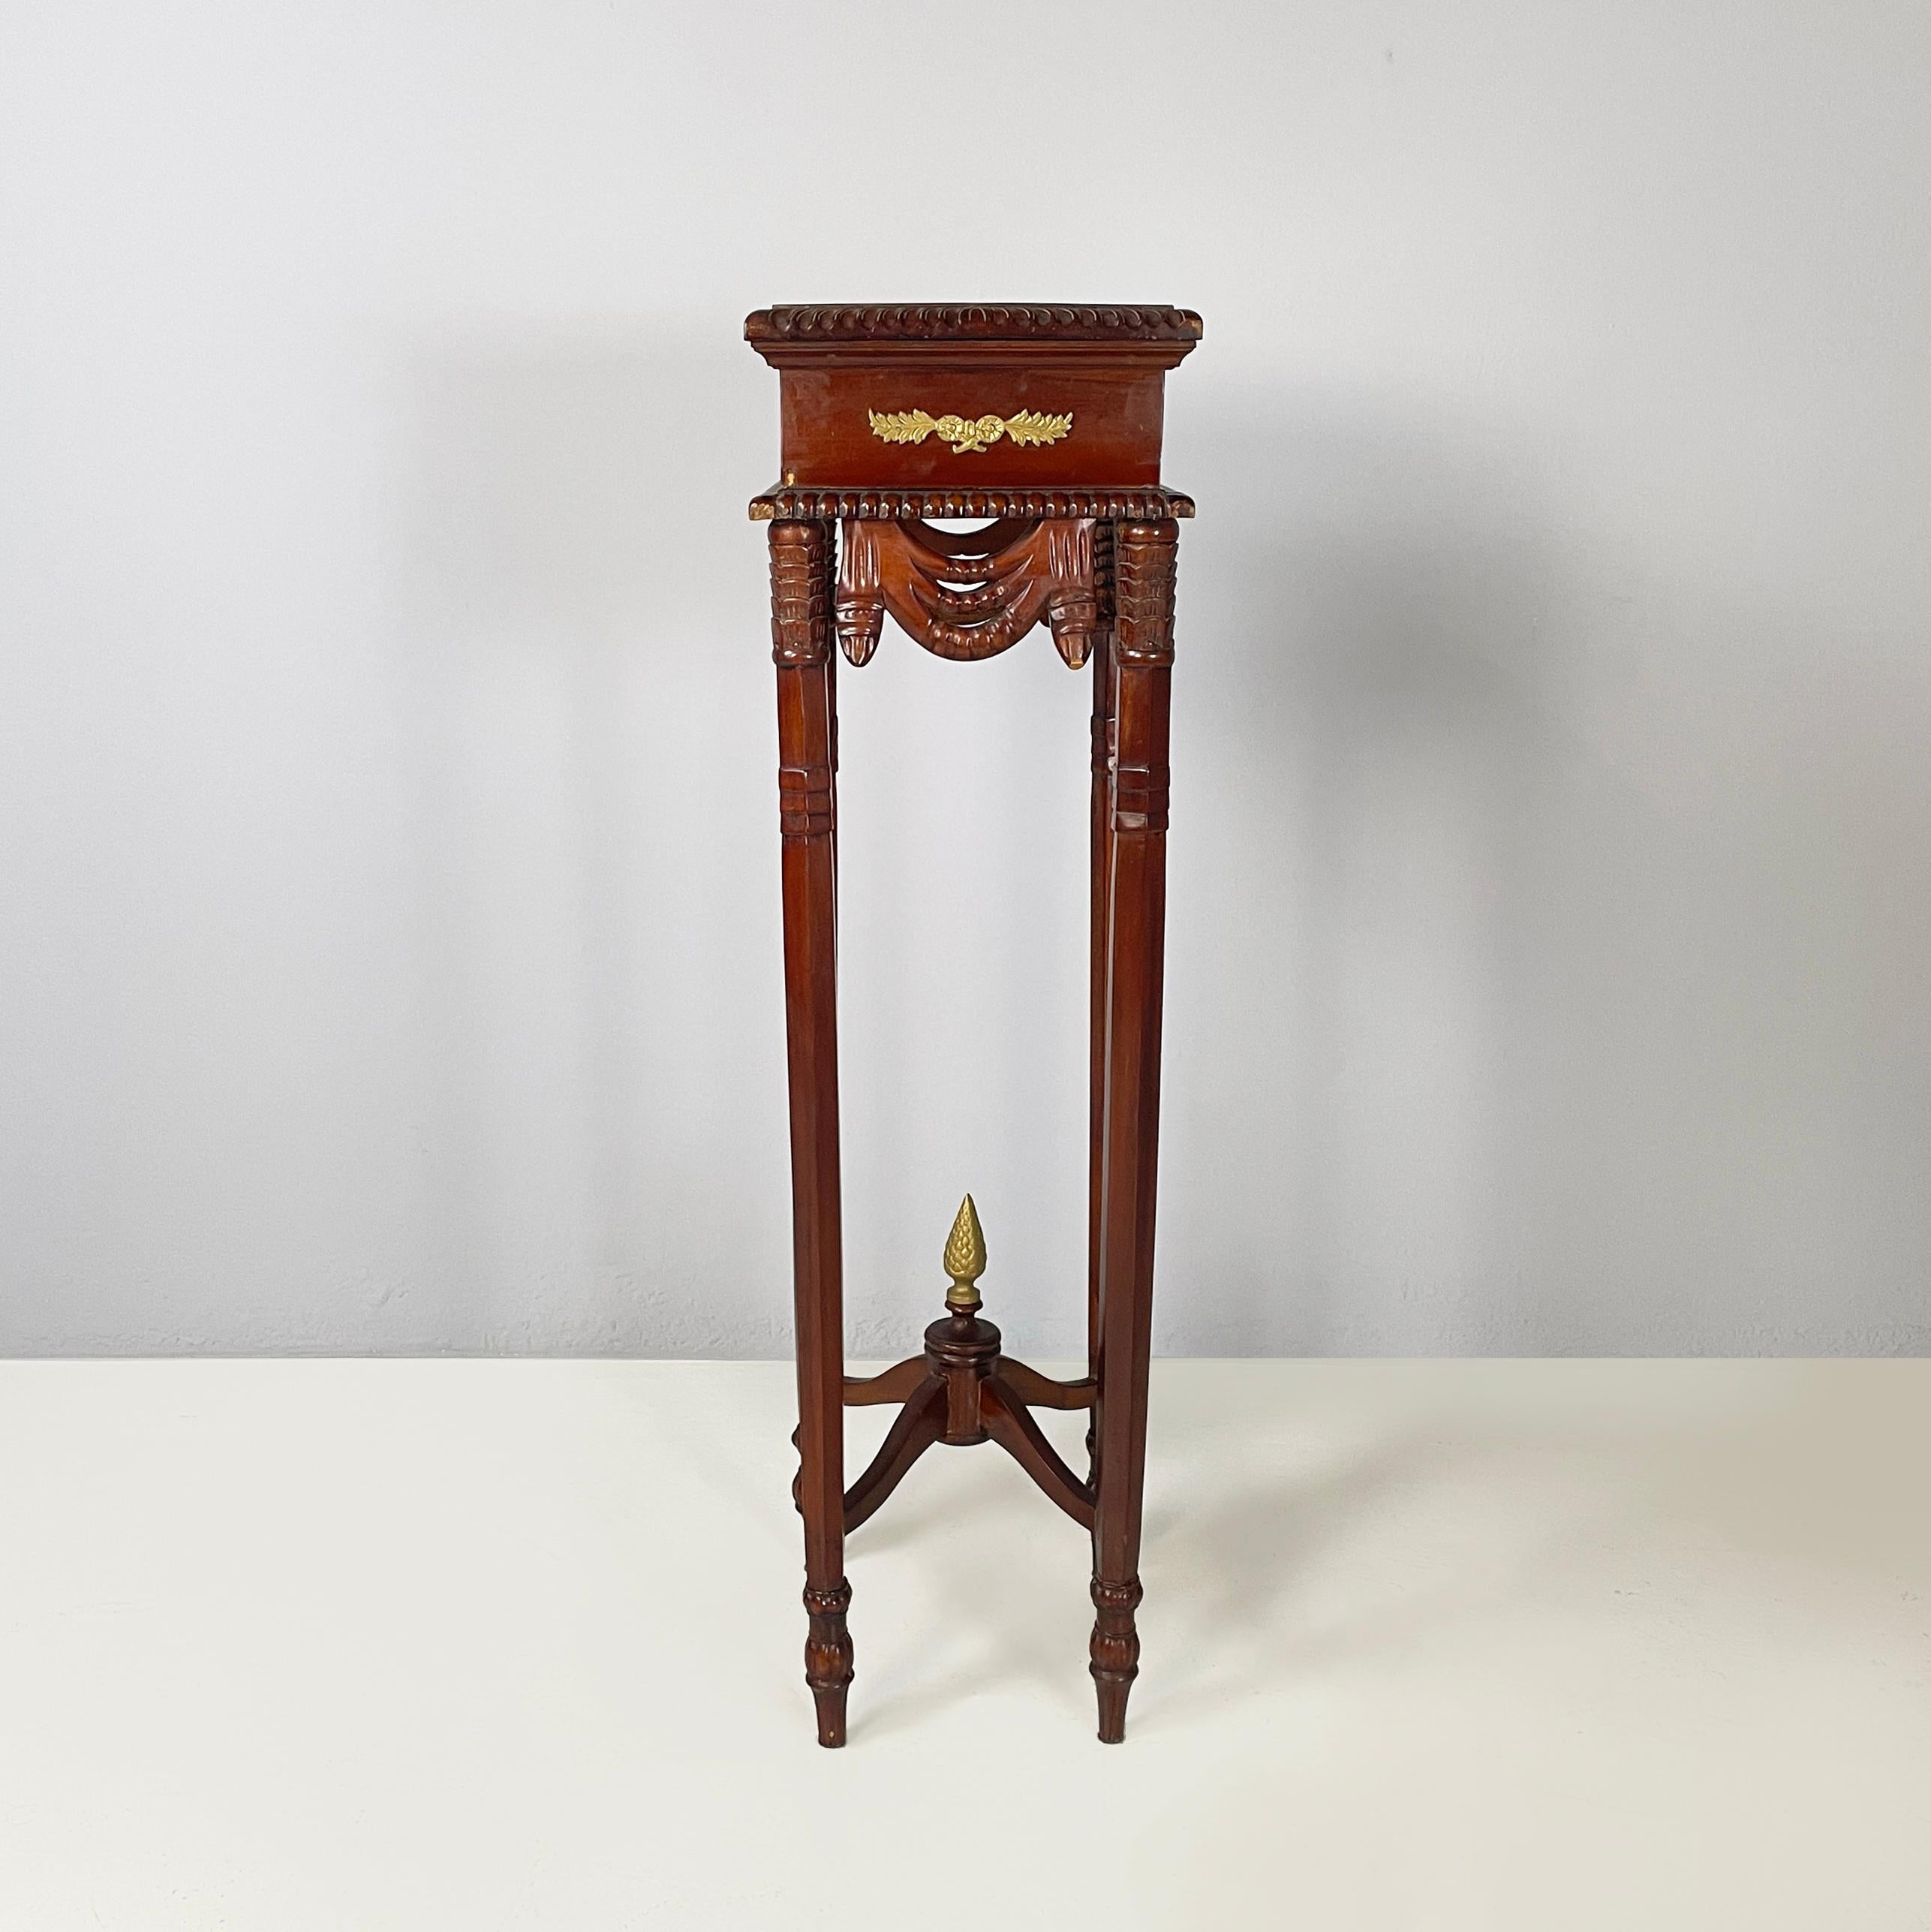 Italian Liberty style Wooden square high column with brass details, 1940s
Square wooden high column. The top has a decoration on the profile and brass decorations with leaves on the sides. The legs are finely worked and slightly curved inwards. In